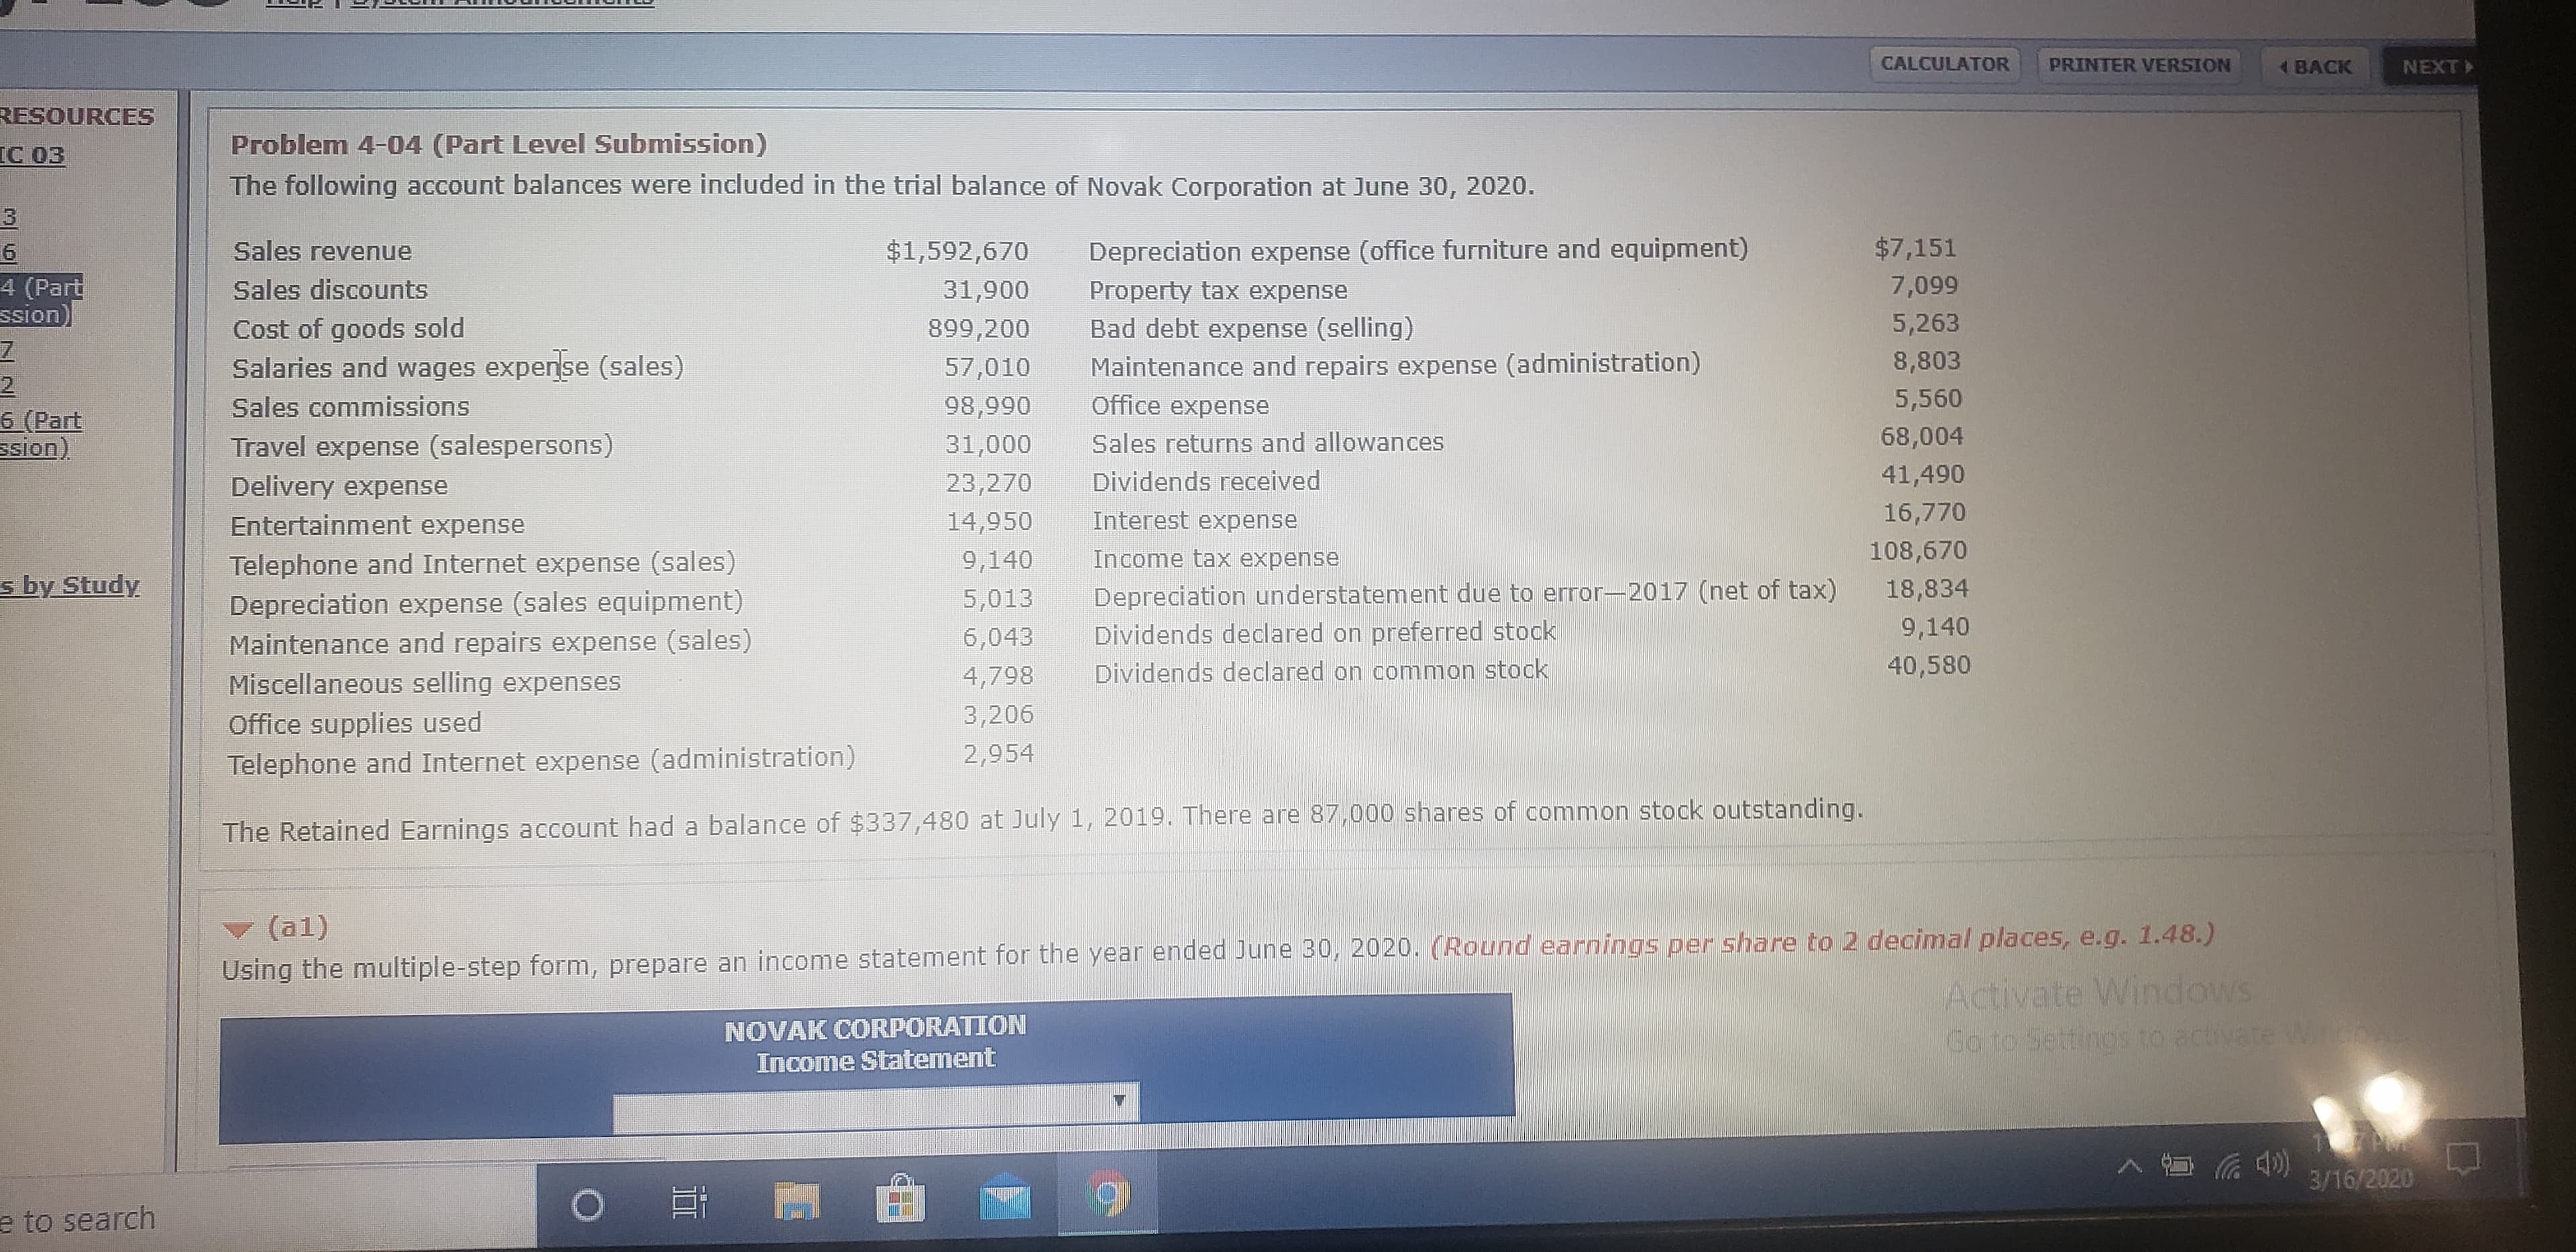 CALCULATOR
PRINTER VERSION
BACK
NEXT
RESOURCES
IC 03
Problem 4-04 (Part Level Submission)
The following account balances were included in the trial balance of Novak Corporation at June 30, 2020.
Sales revenue
$1,592,670
Depreciation expense (office furniture and equipment)
$7,151
4 (Part
ssion)
Sales discounts
31,900
Property tax expense
7,099
5,263
Bad debt expense (selling)
Maintenance and repairs expense (administration)
Cost of goods sold
899,200
Salaries and wages expense (sales)
57,010
8,803
Sales commissions
98,990
Office expense
5,560
6 (Part
Ssion)
Travel expense (salespersons)
31,000
Sales returns and allowances
68,004
Delivery expense
23,270
Dividends received
41,490
Entertainment expense
14,950
Interest expense
16,770
Telephone and Internet expense (sales)
9,140
Income tax expense
108,670
s by Study
5,013
Depreciation understatement due to error-2017 (net of tax)
18,834
Depreciation expense (sales equipment)
Maintenance and repairs expense (sales)
Miscellaneous selling expenses
6,043
Dividends declared on preferred stock
9,140
4,798
Dividends declared on common stock
40,580
3,206
Office supplies used
Telephone and Internet expense (administration)
2,954
The Retained Earnings account had a balance of $337,480 at July 1, 2019. There are 87,000 shares of common stock outstanding.
(a1)
Using the multiple-step form, prepare an income statement for the year ended June 30, 2020. (Round earnings per share to 2 decimal places, e.g. 1.48.)
Activate Windows
NOVAK CORPORATION
Go to Settings to activate Winco
Income Statement
3/16/2020
e to search
